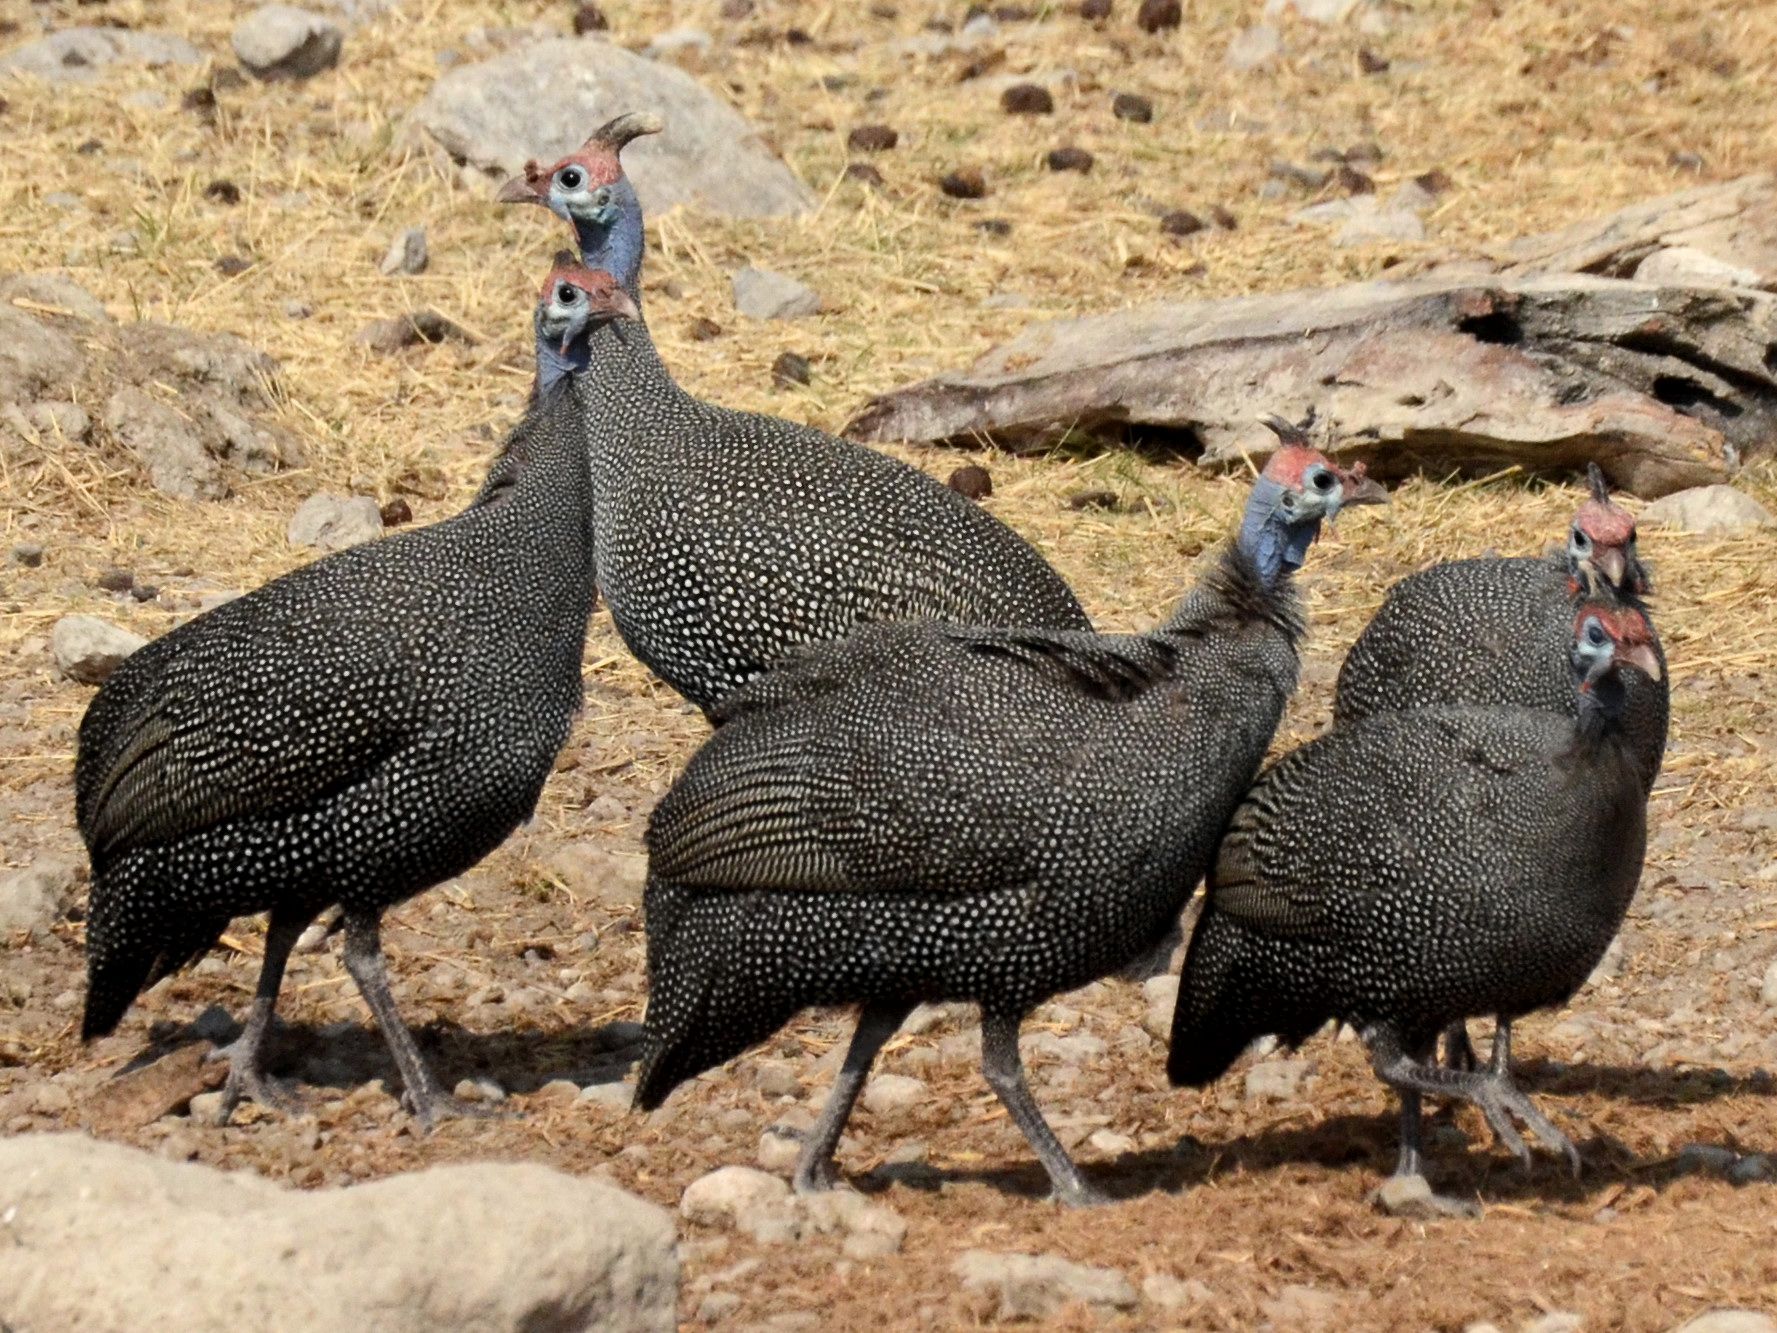 Click picture to see more Helmeted Guineafowls.